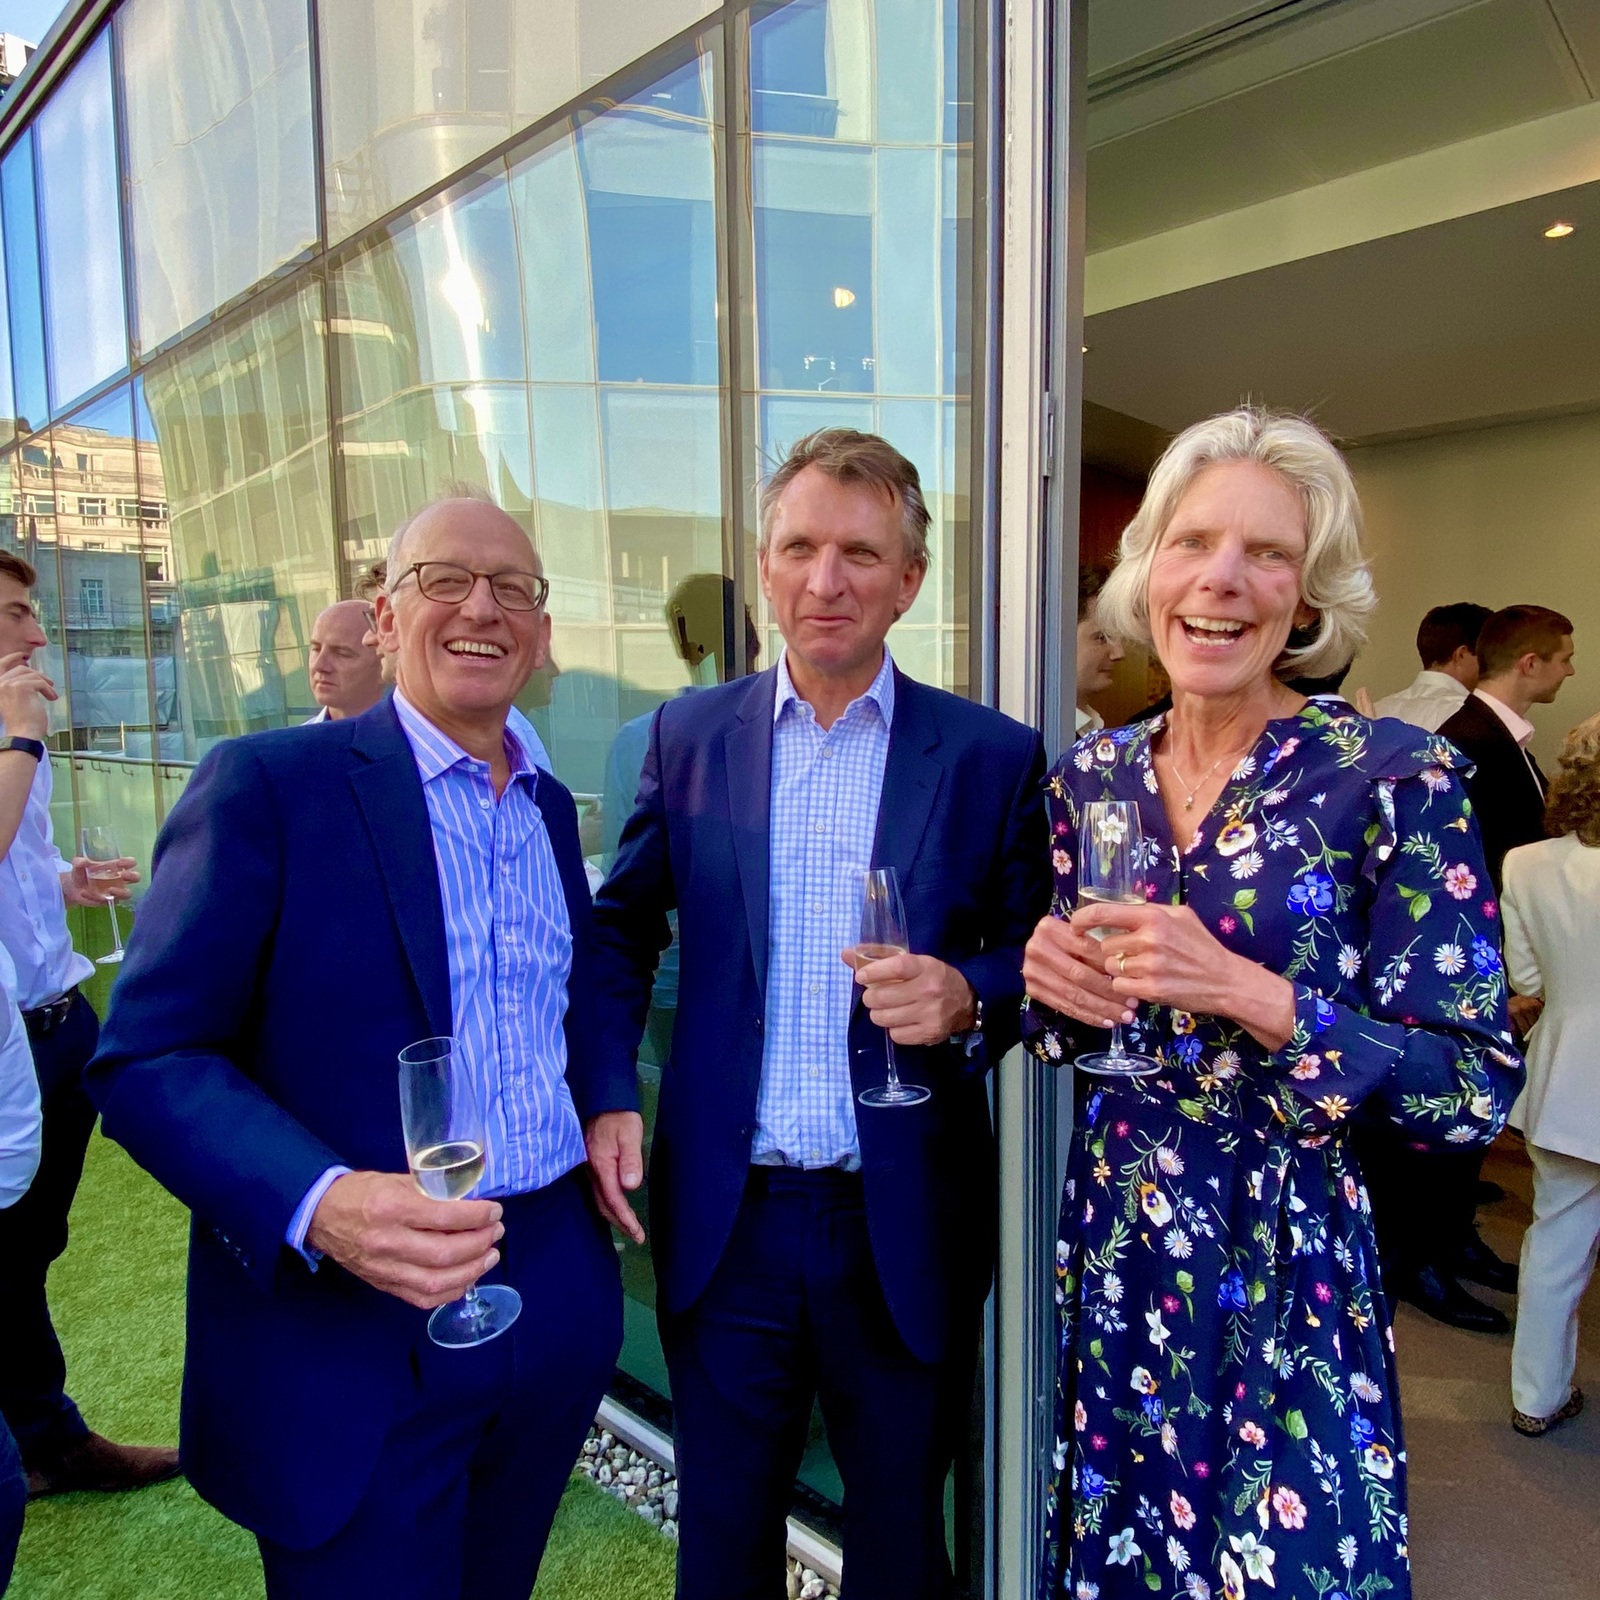 14 June 2023 - Delighted to join Jim and Emma Keeling to celebrate the 30th Anniversary of Corbett Keeling, who concentrate on selling UK privately owned businesses, and meet up with so many colleagues across the VC and investment community of The City. Happy Birthday!